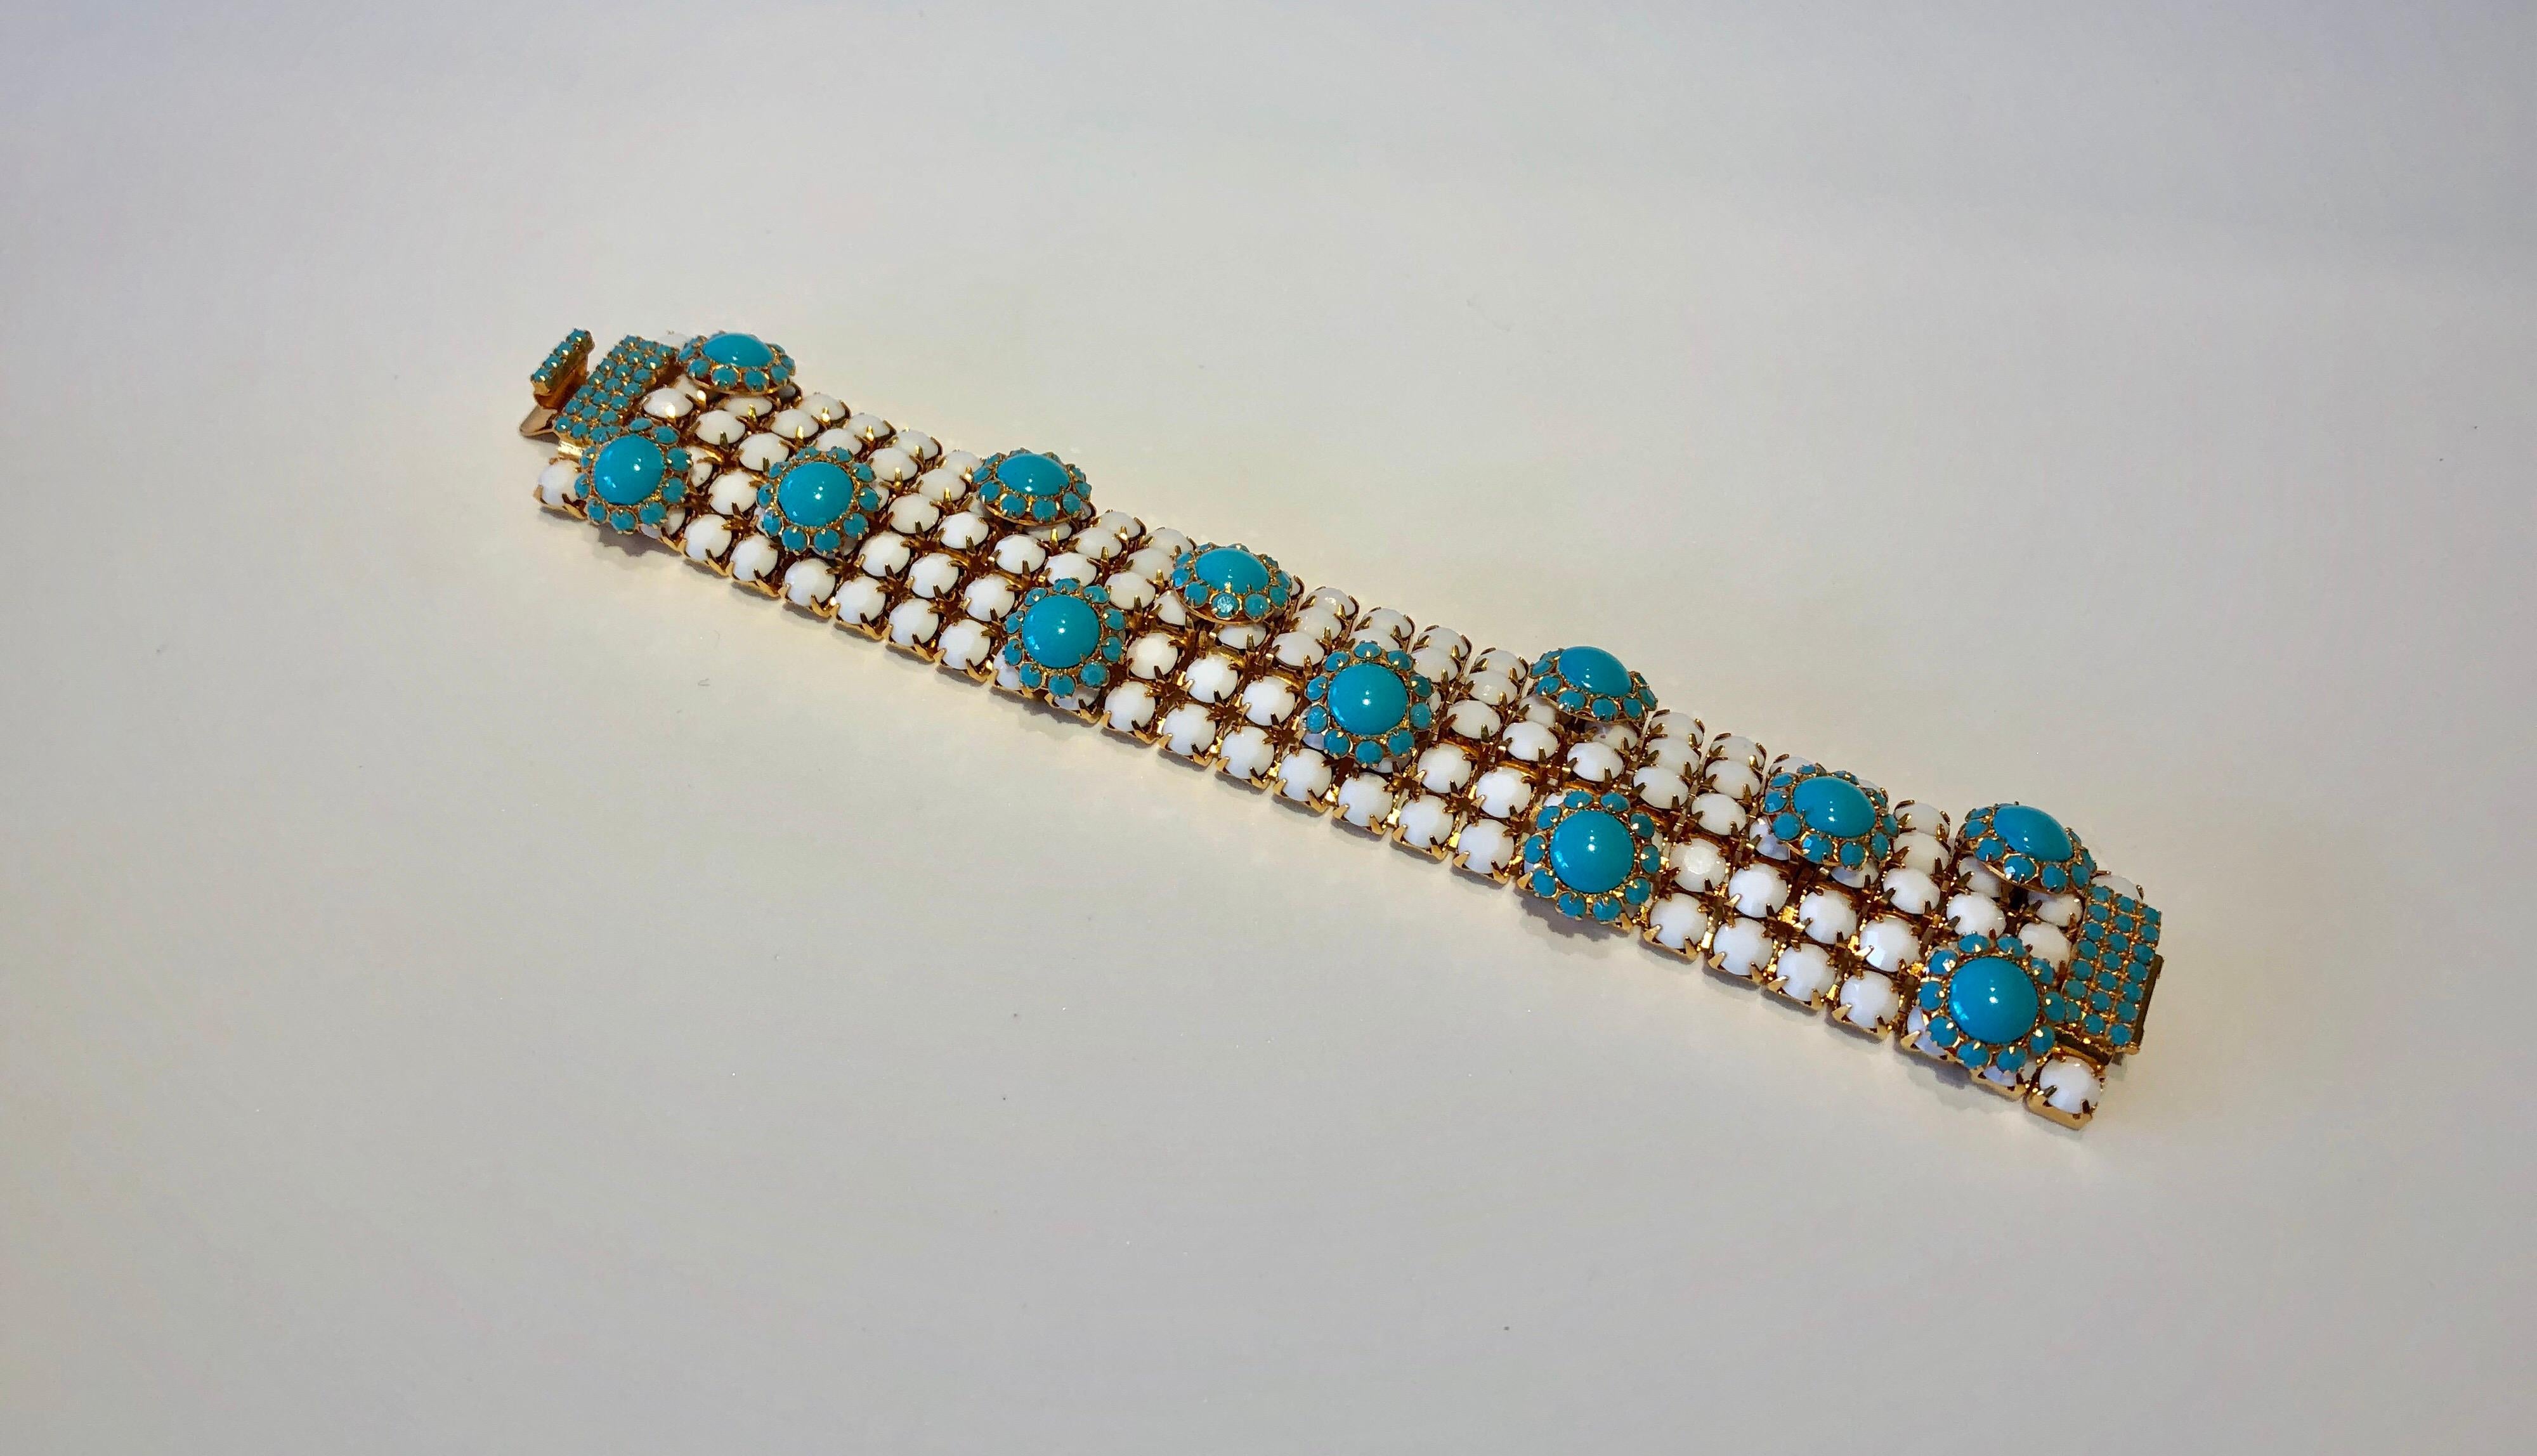  Stylish vintage designer faux turquoise statement bracelet by William de Lillo c.1970 - the unique architectural bracelet is comprised of gilt metal and features five rows of faceted white glass rhinestones. Accenting the bracelet are starburst